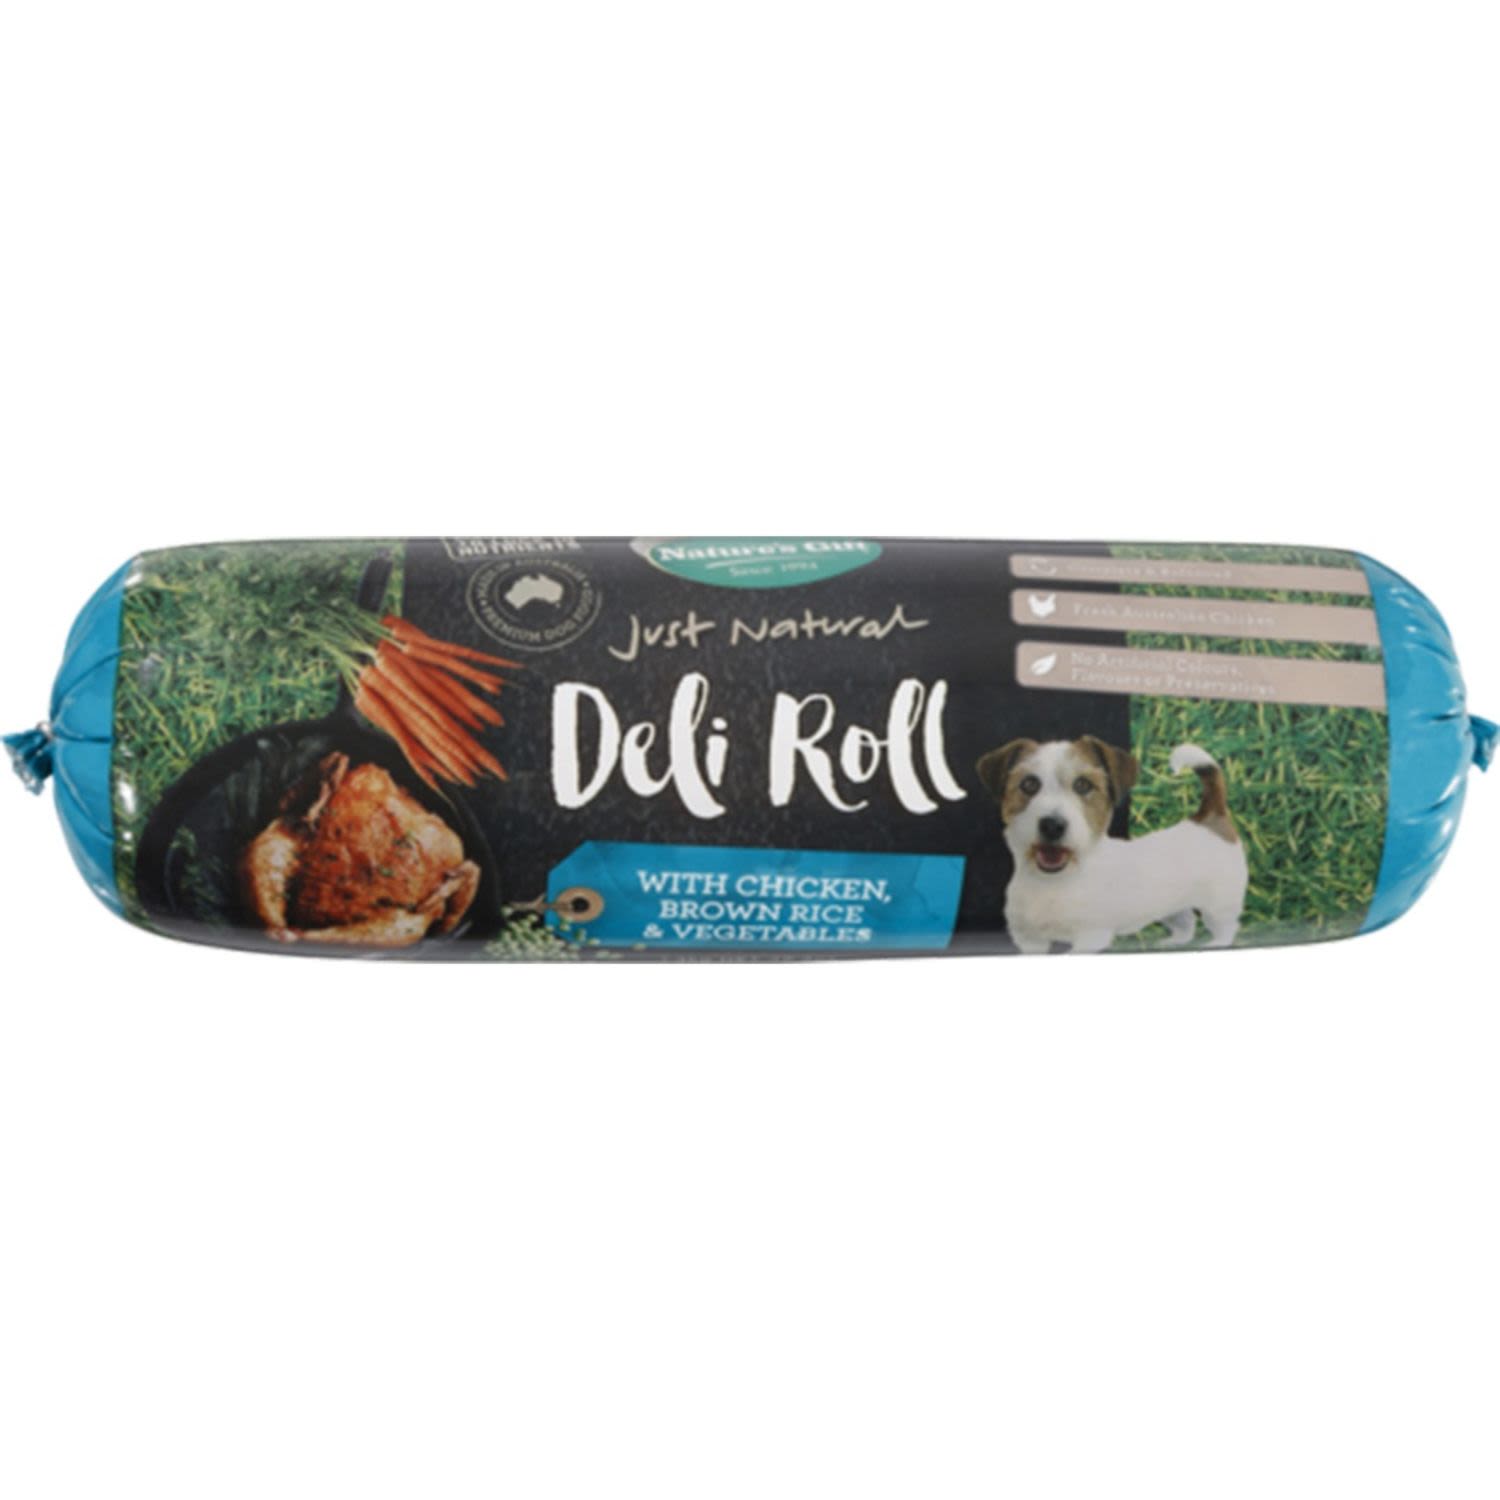 Nature's Gift Deli Roll With Chicken, Brown Rice & Vegetables, 1.4 Kilogram